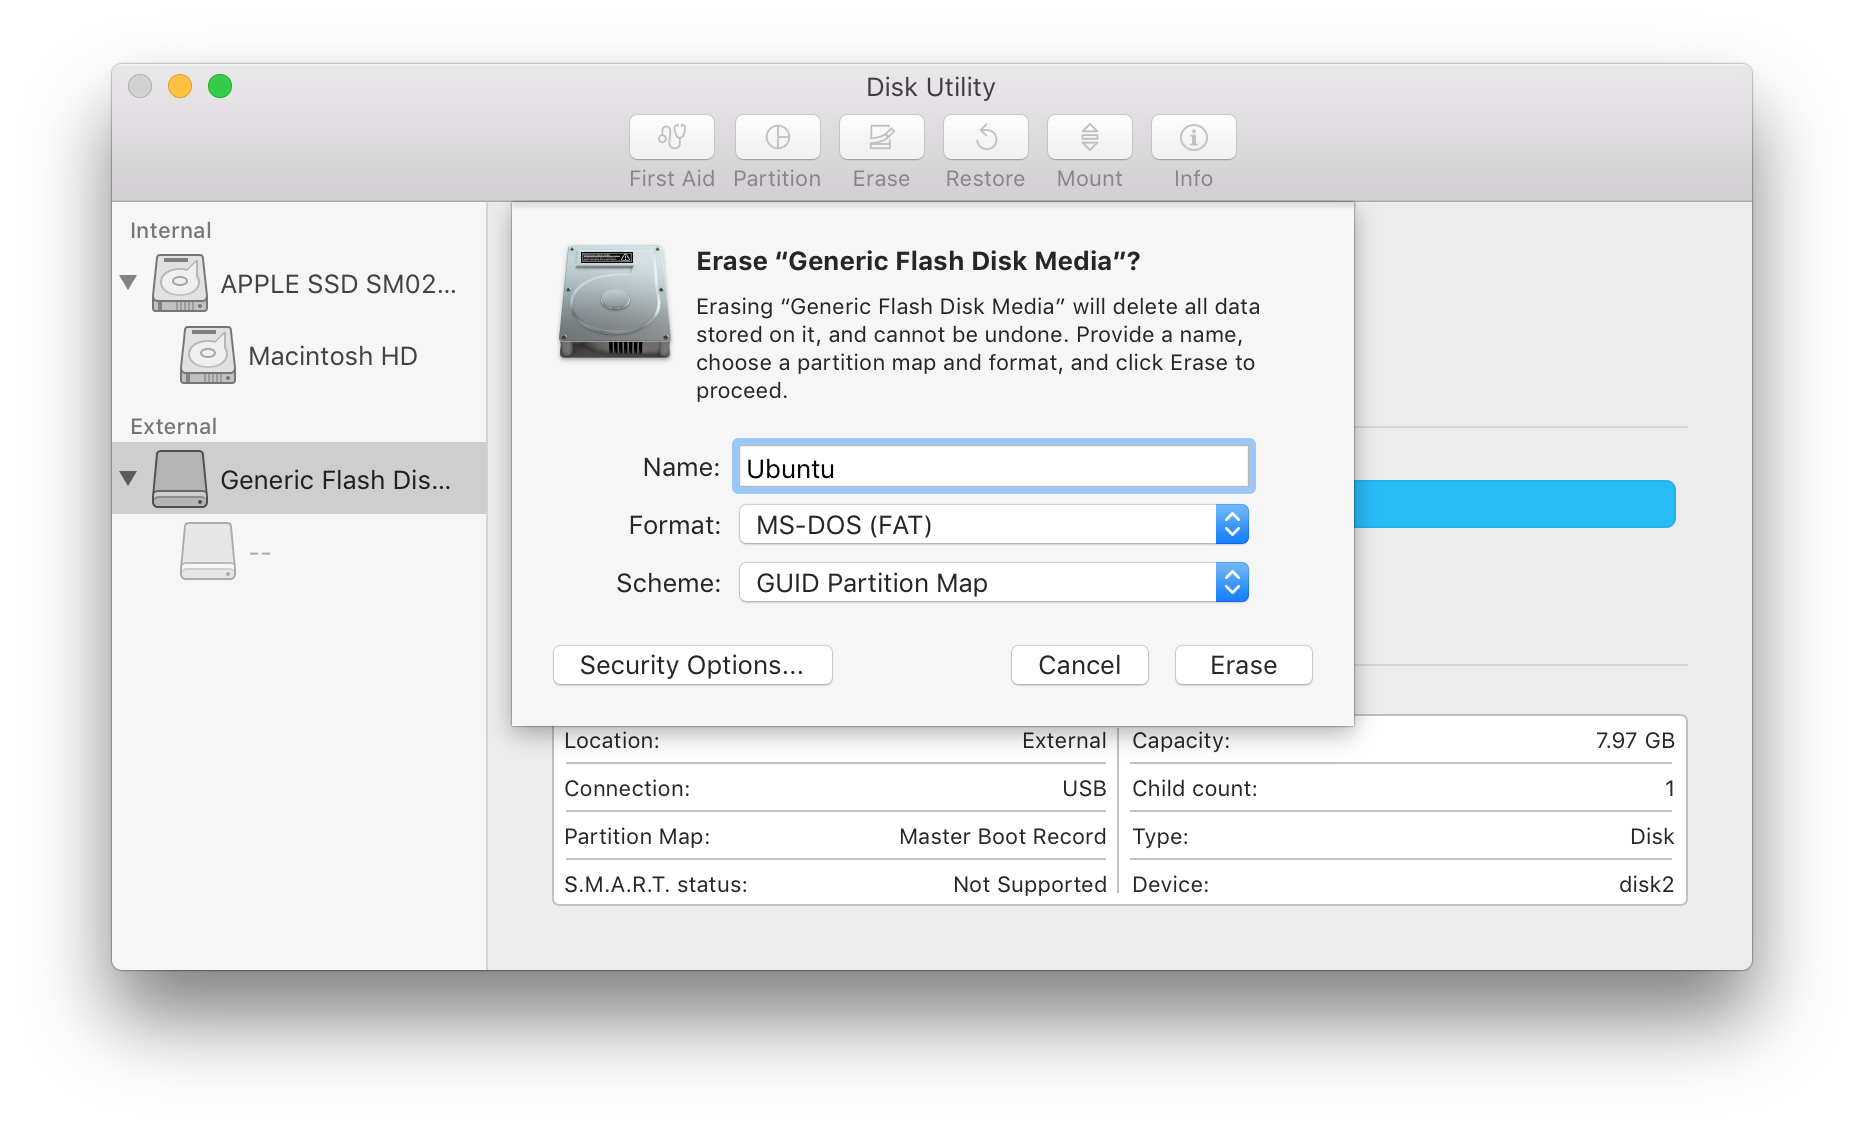 does a usb stick need to be formatted differently for mac os vs windows